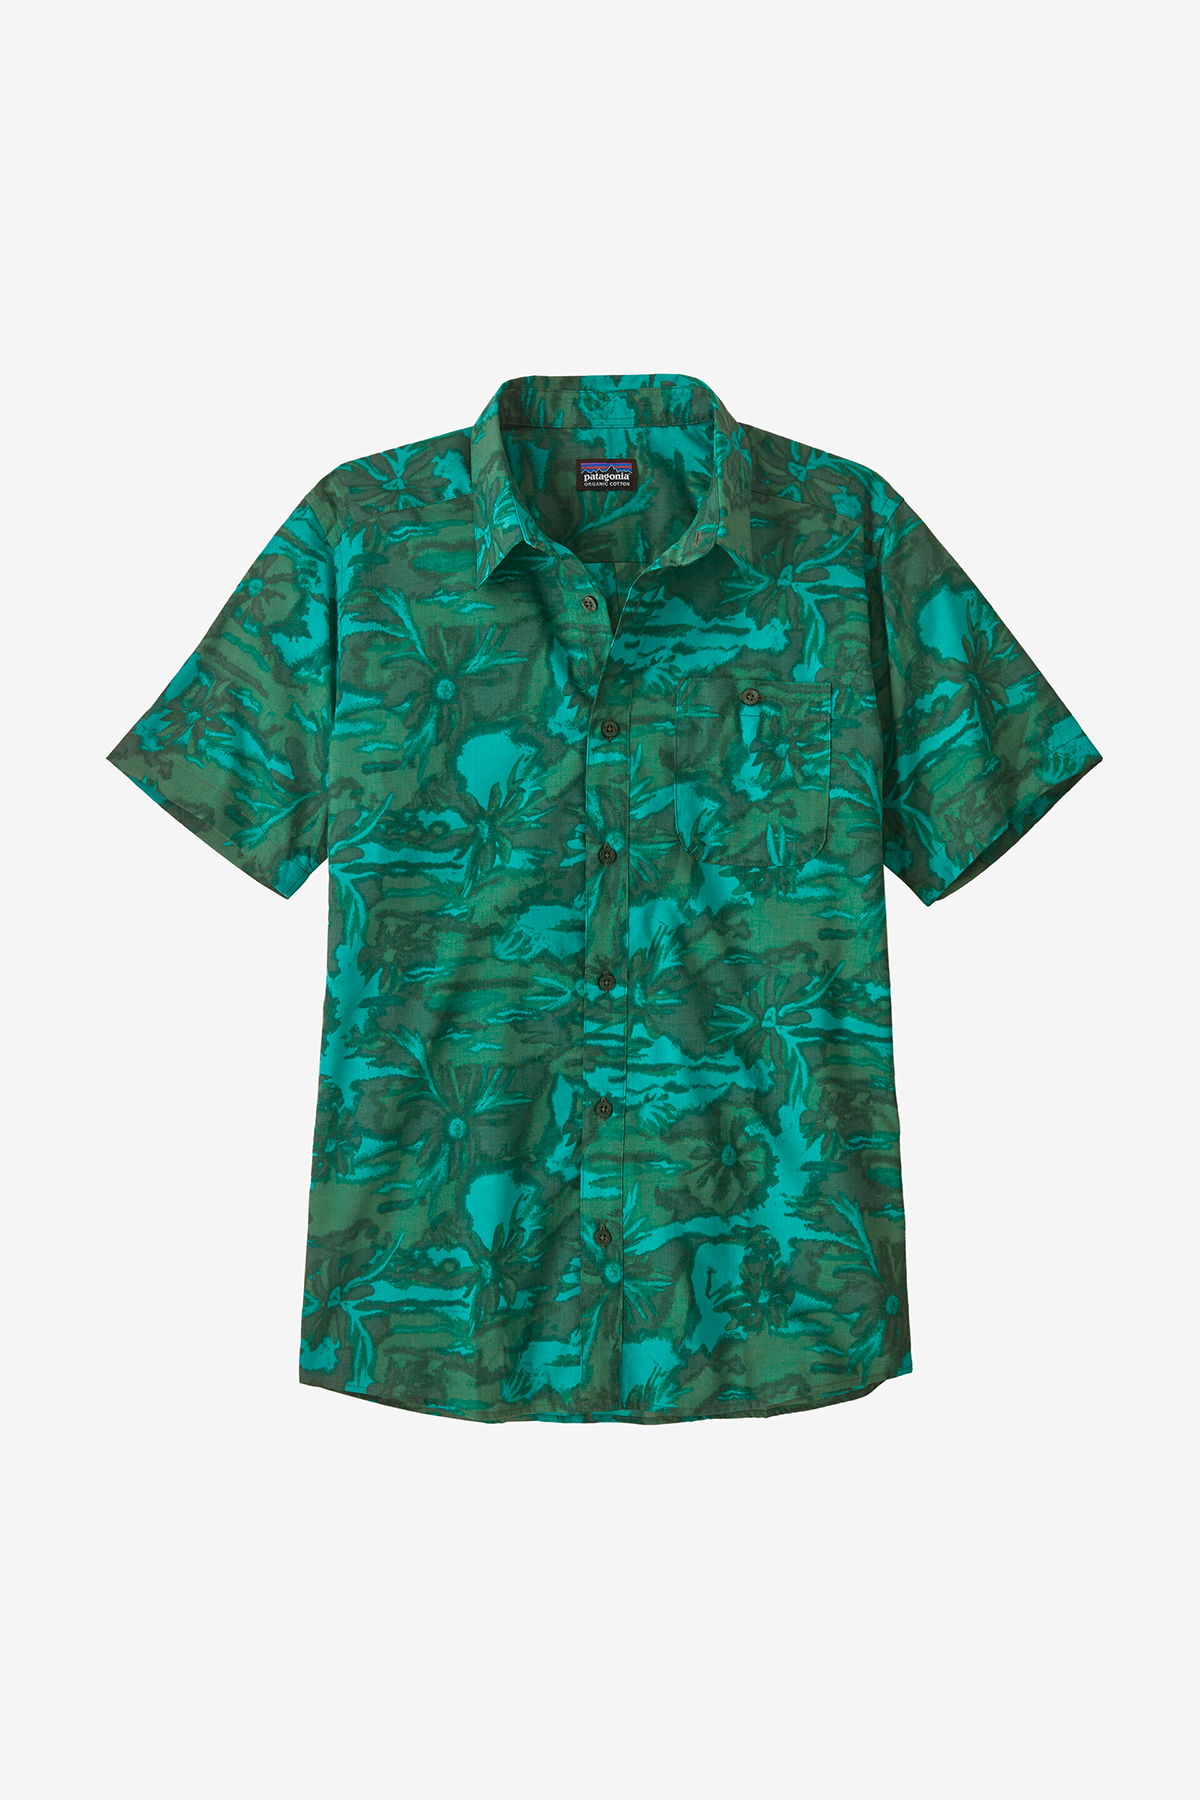 M's Go To Shirt - Patagonia